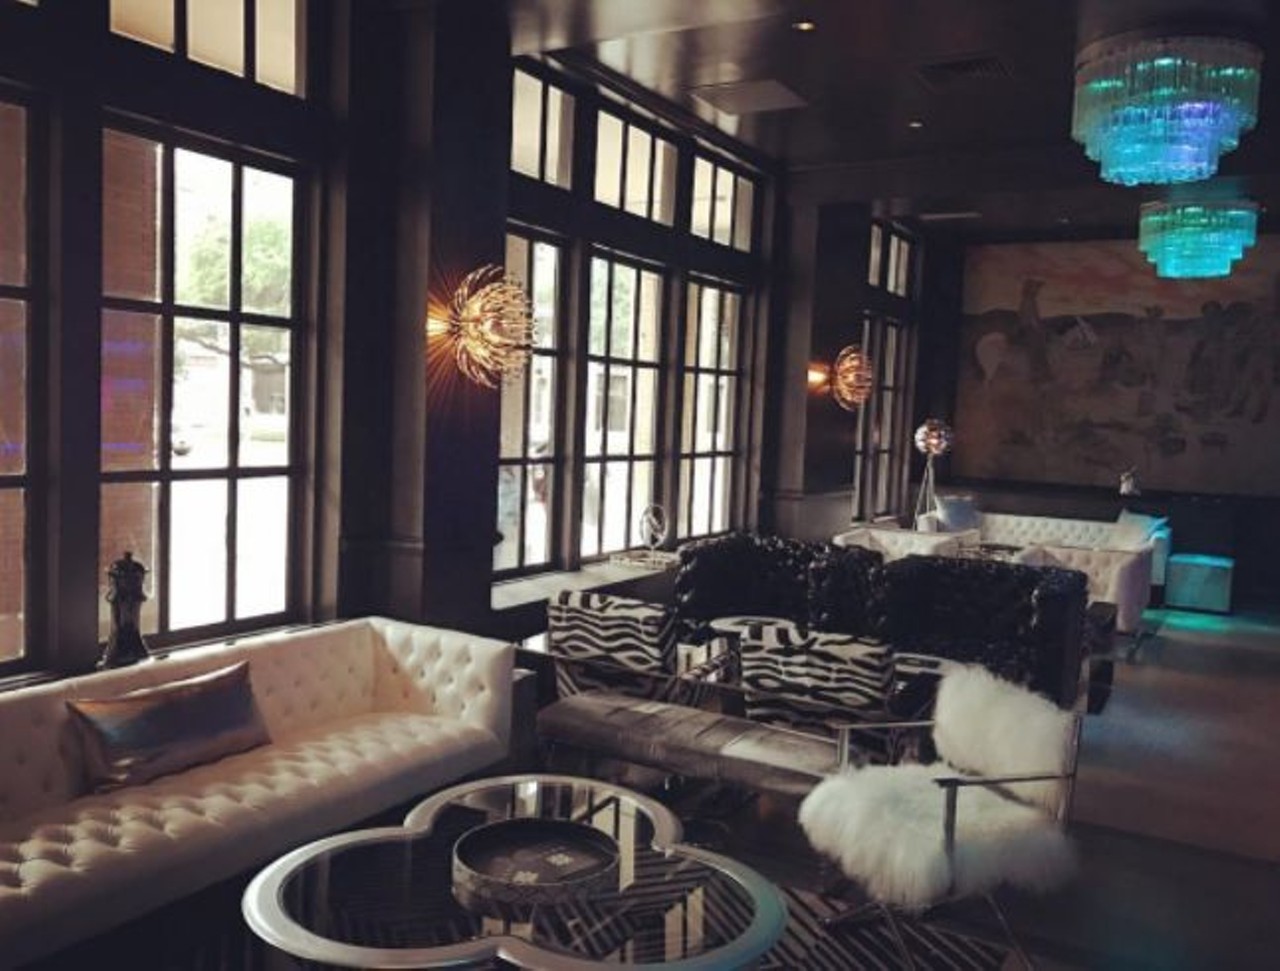 Haunt Lounge at The St. Anthony Hotel
300 E. Travis, (210) 227-4392
Though spacious enough for posh seating and elaborate design details, Haunt is intimate and tiny, especially compared to neighboring Rebelle at the St. Anthony Hotel. 
Photo via Instagram,  chriscracklepop